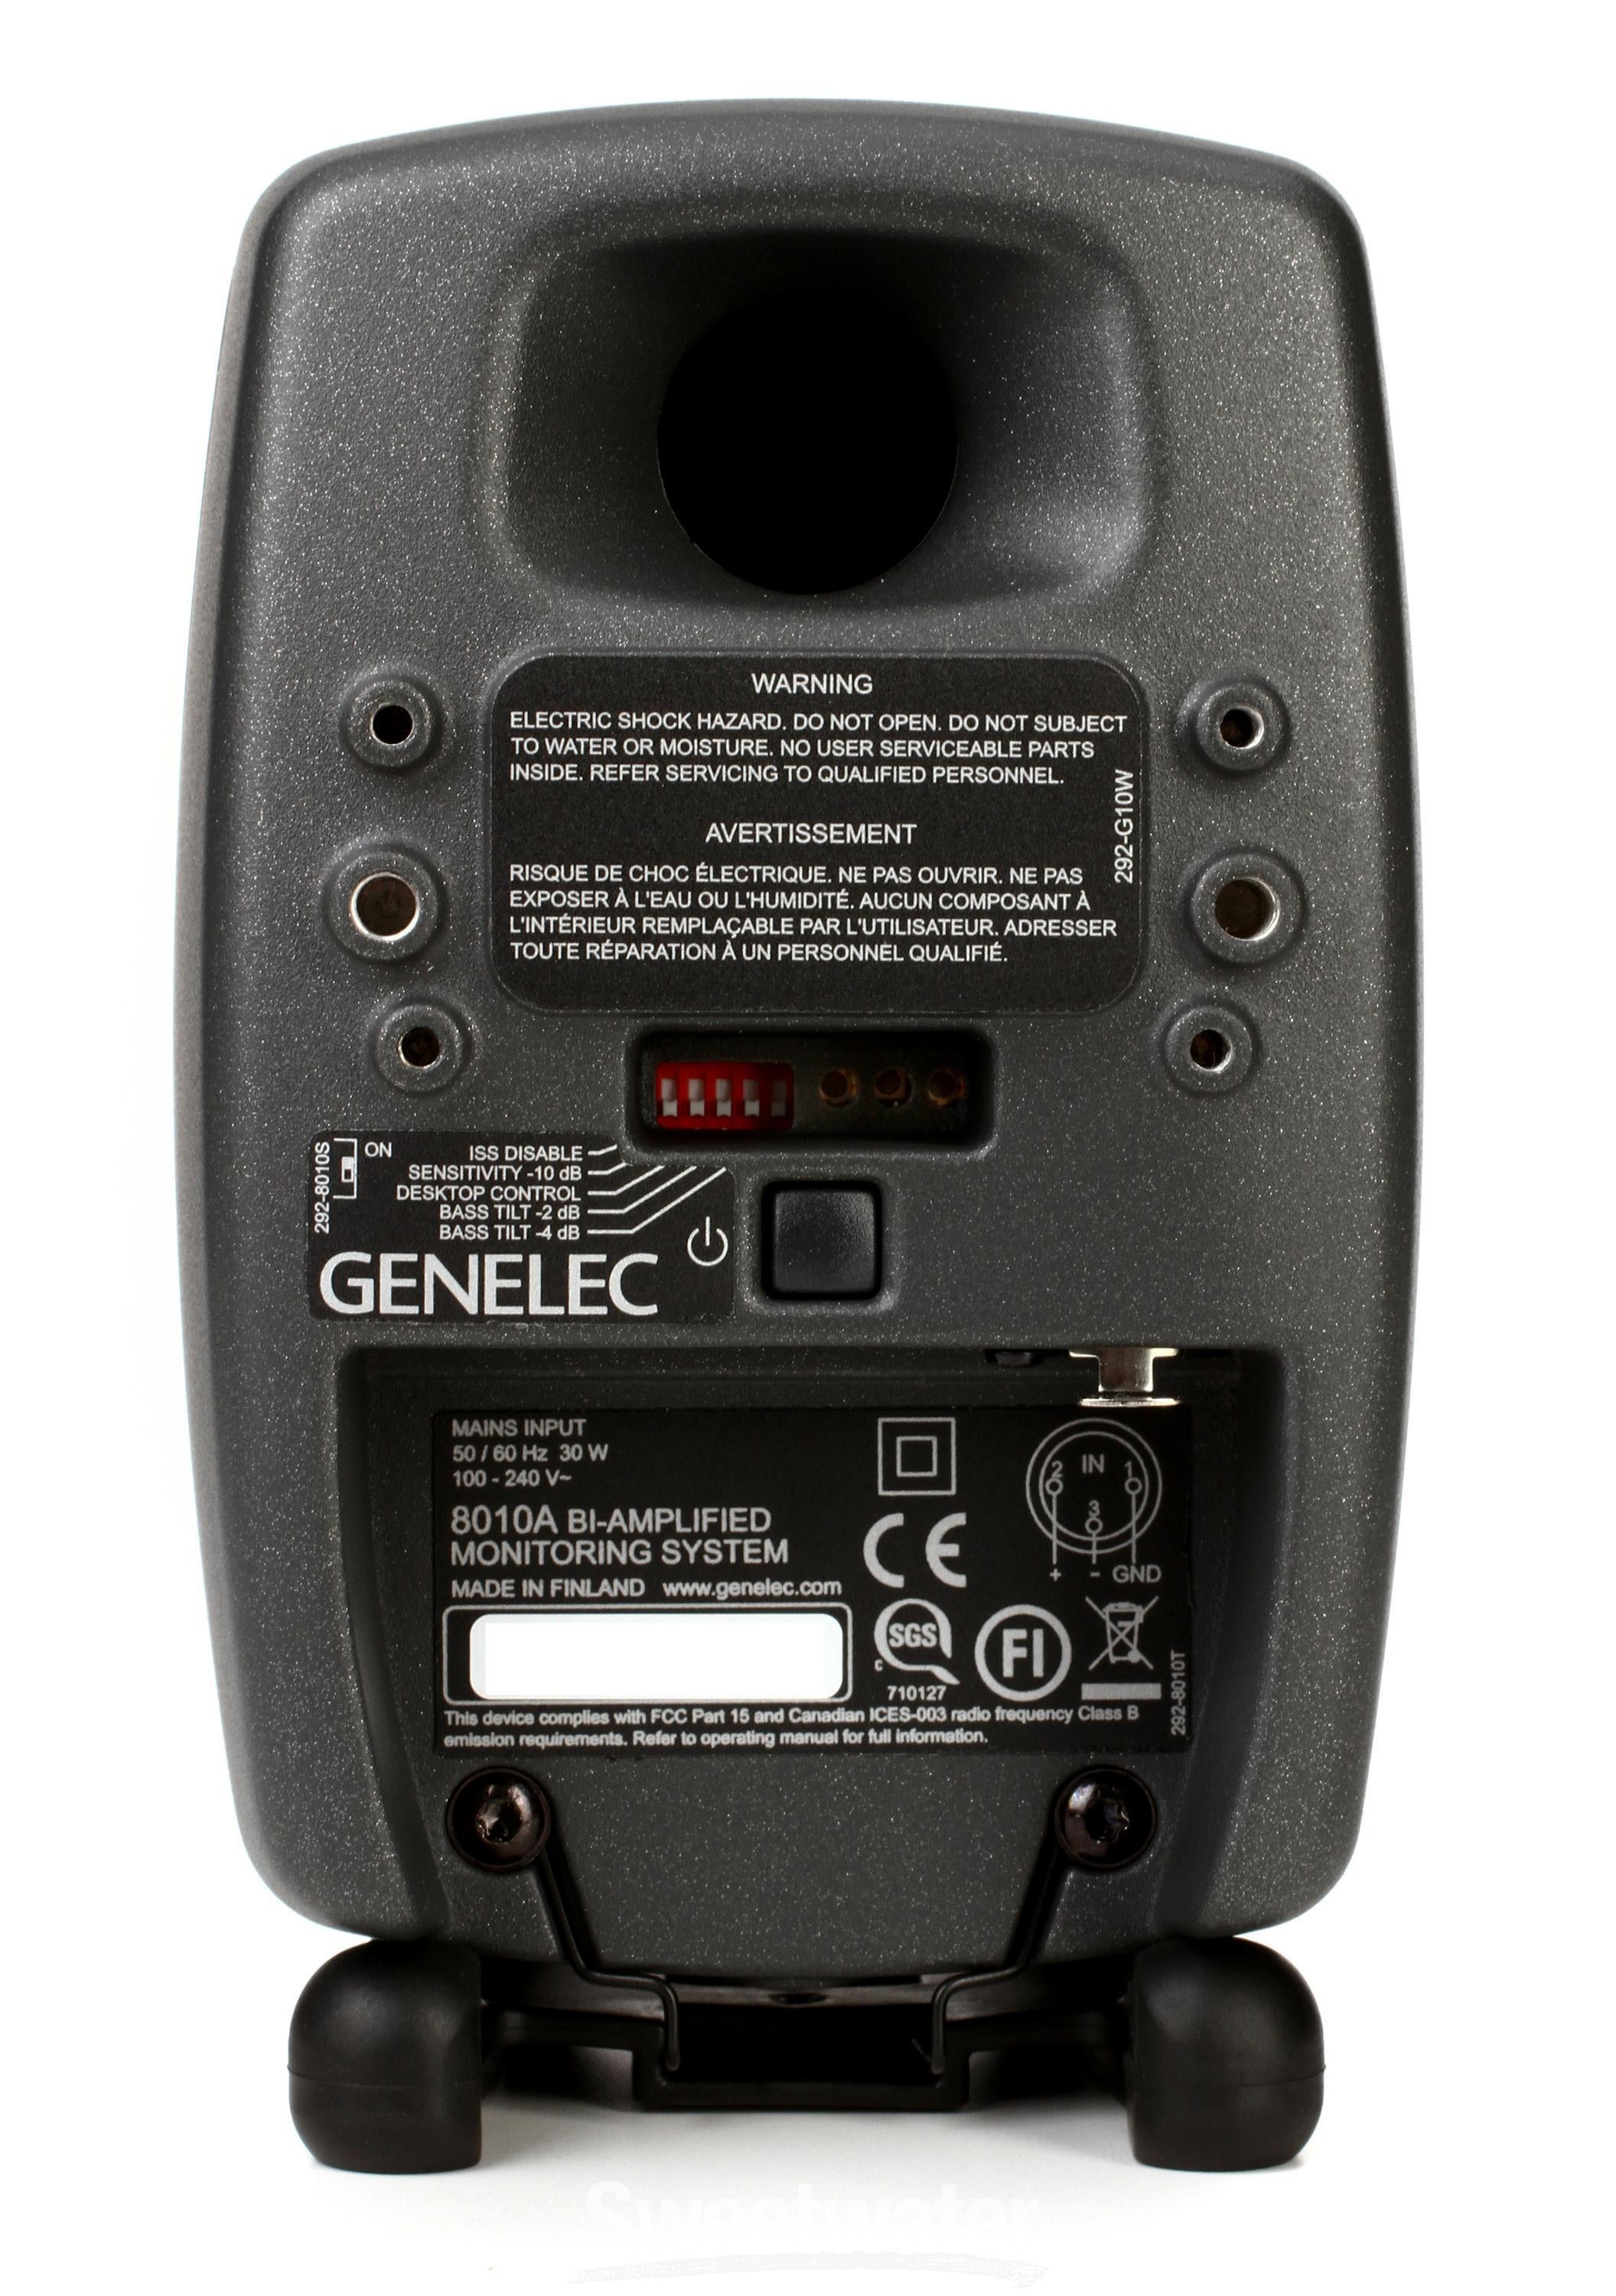 Genelec 8010A 3 inch Powered Studio Monitor | Sweetwater